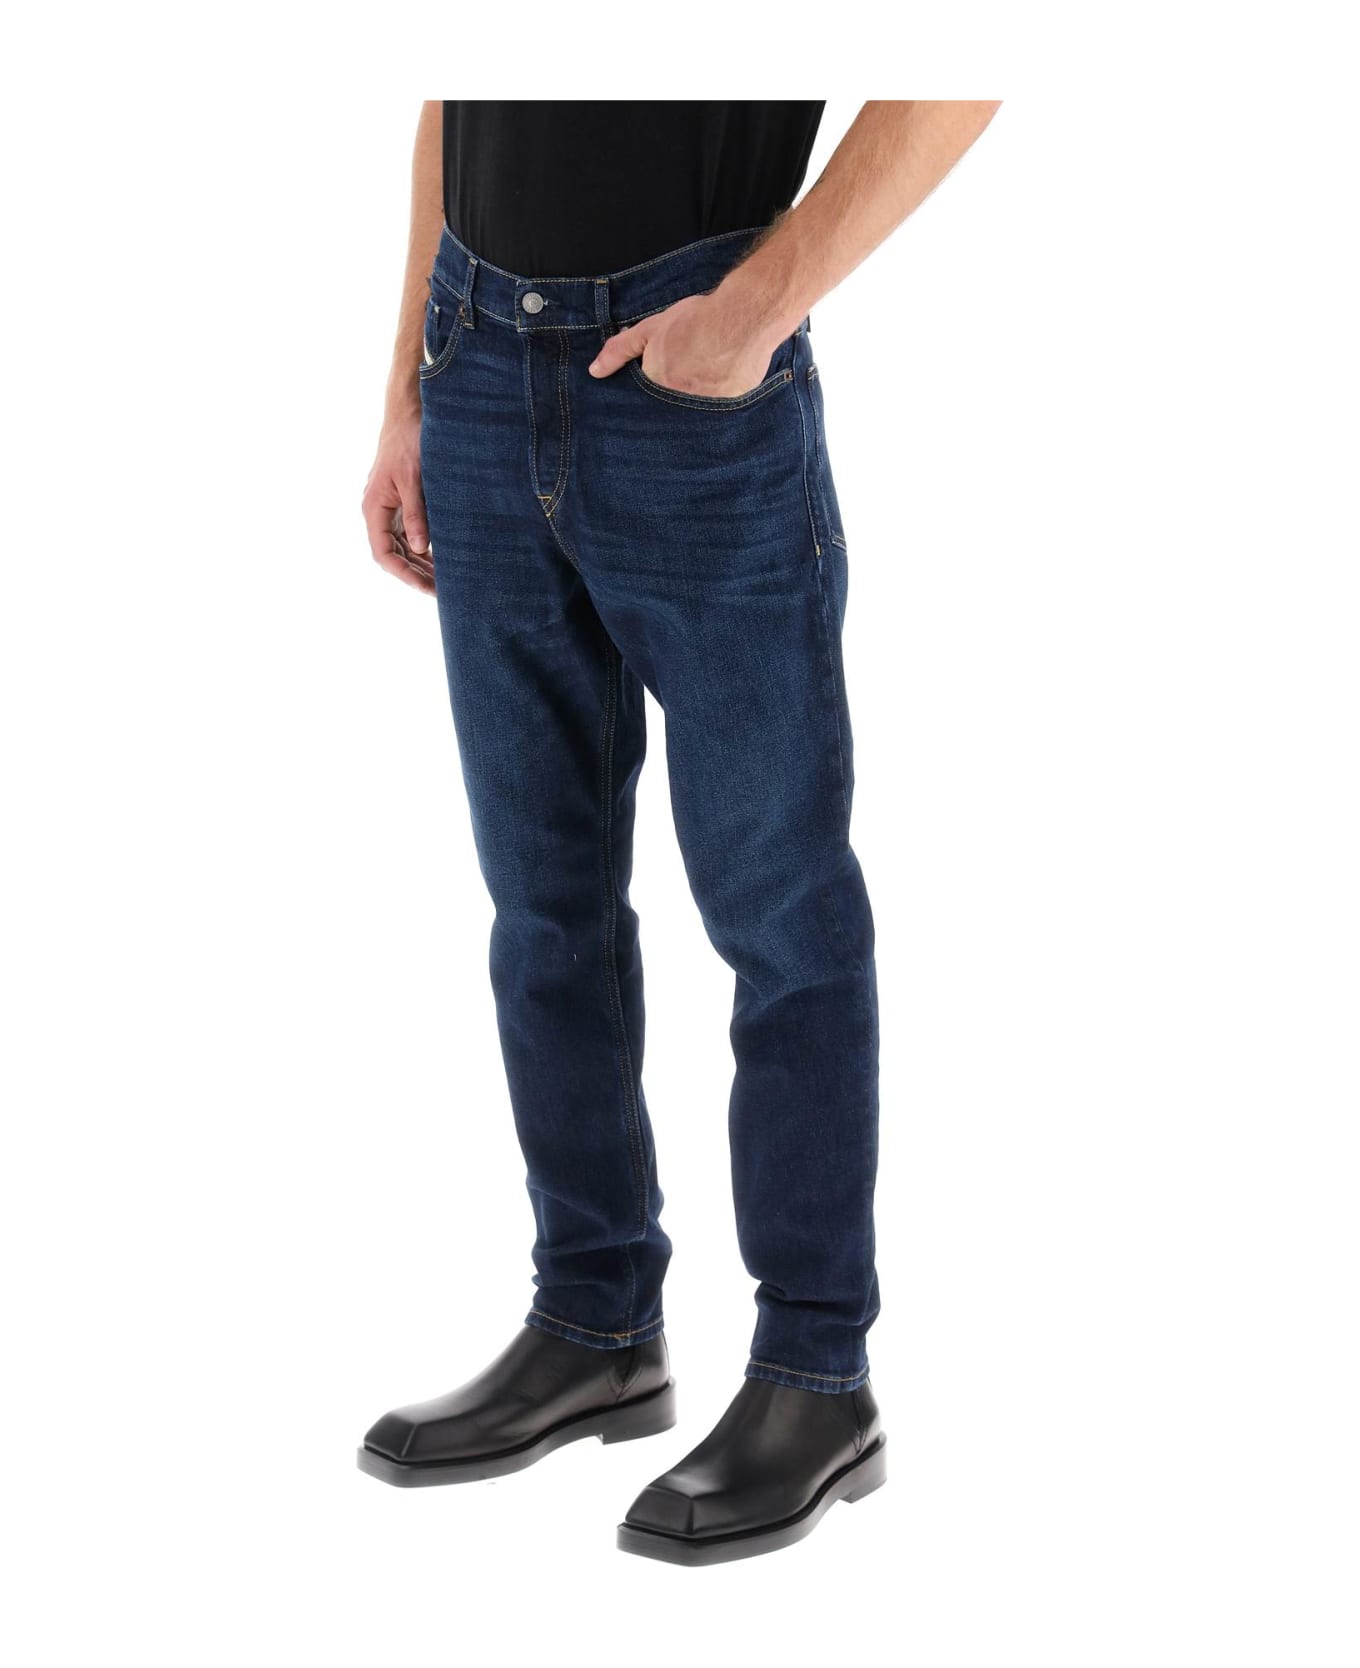 Diesel 'd-fining' Jeans With Tapered Leg - Blu scuro